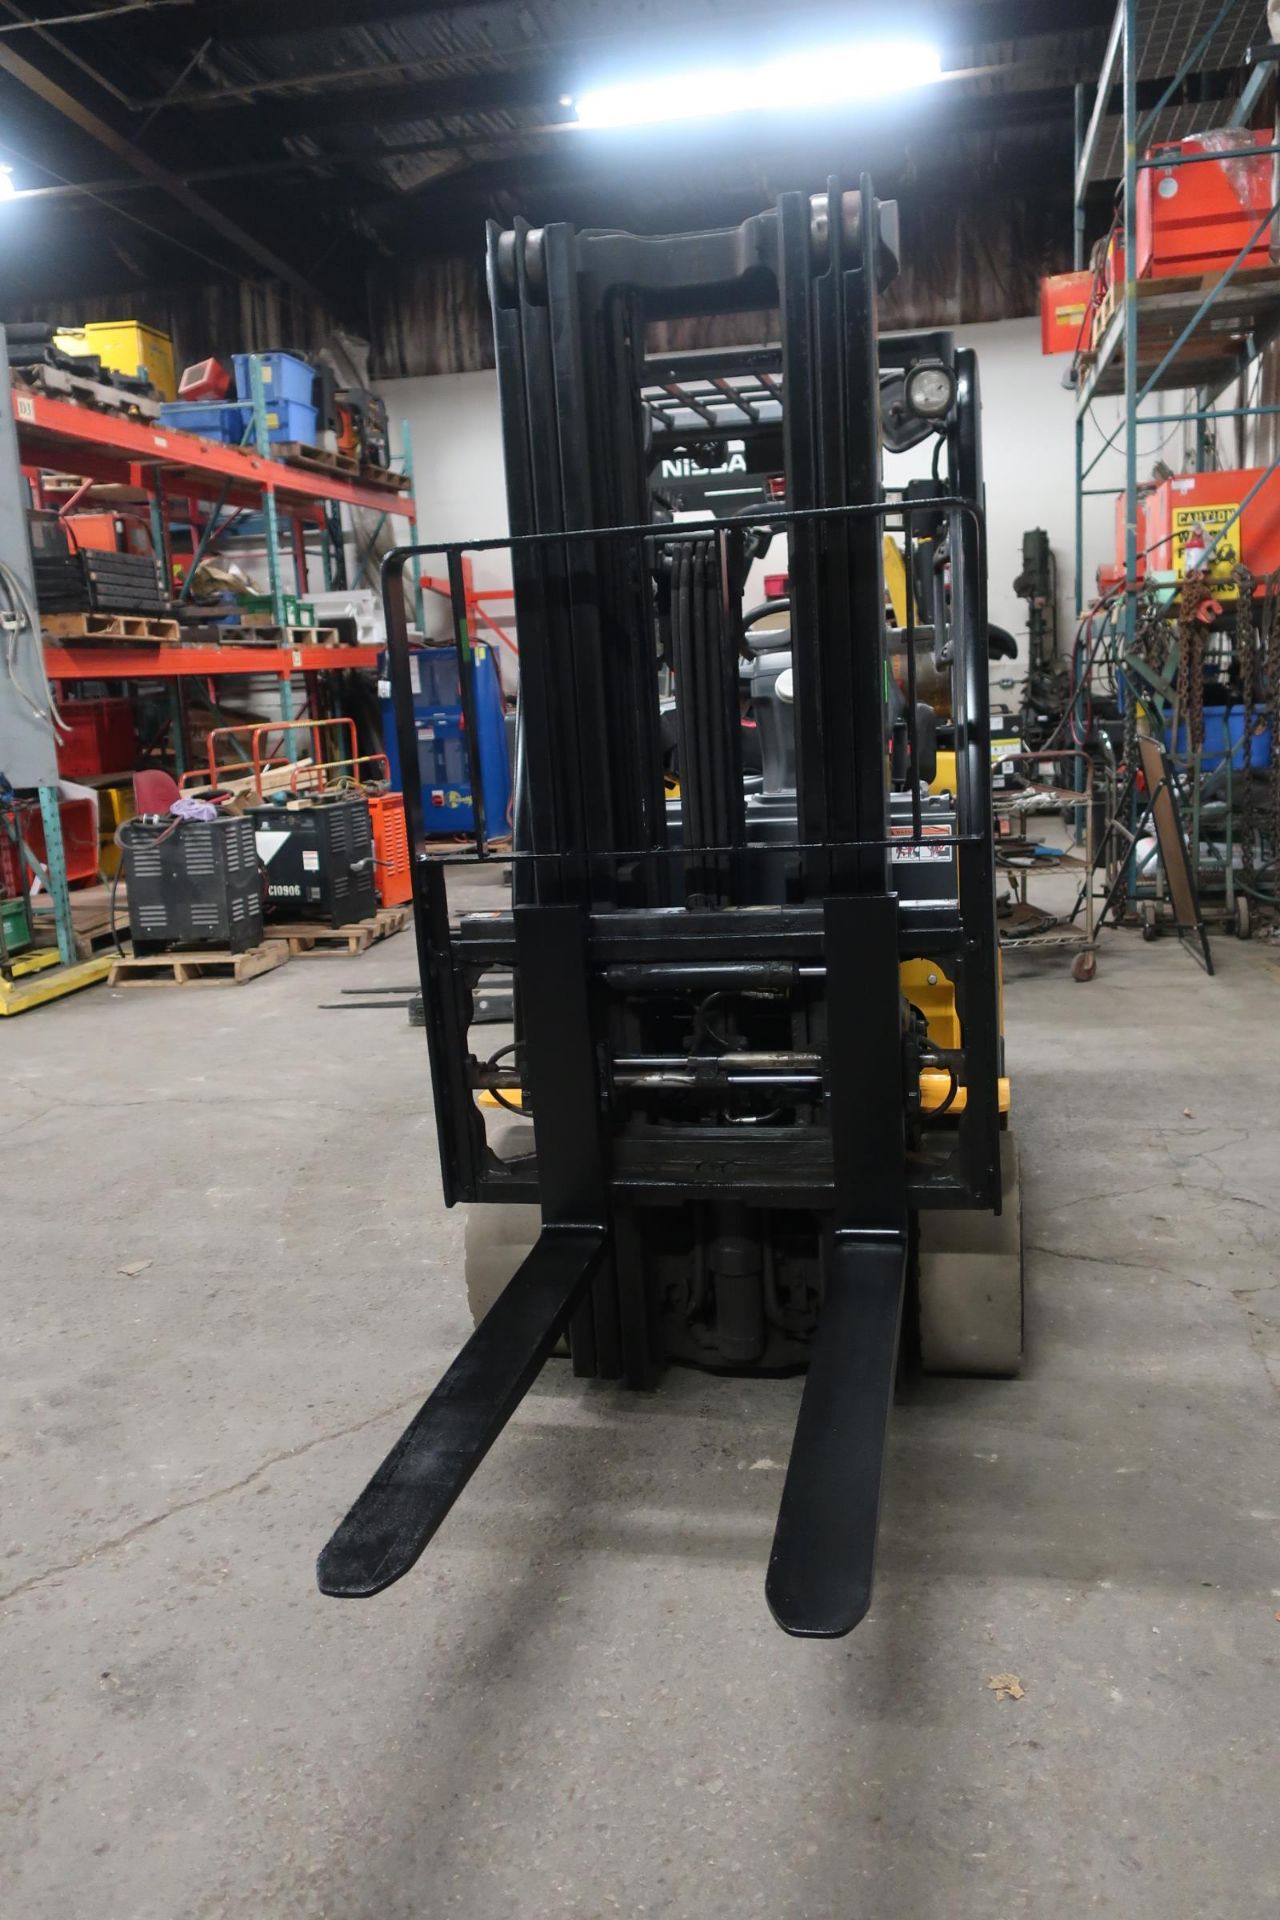 FREE CUSTOMS - 2015 Yale 6000lbs Capacity Forklift with 3-stage mast - LPG (propane) with sideshift - Image 2 of 2